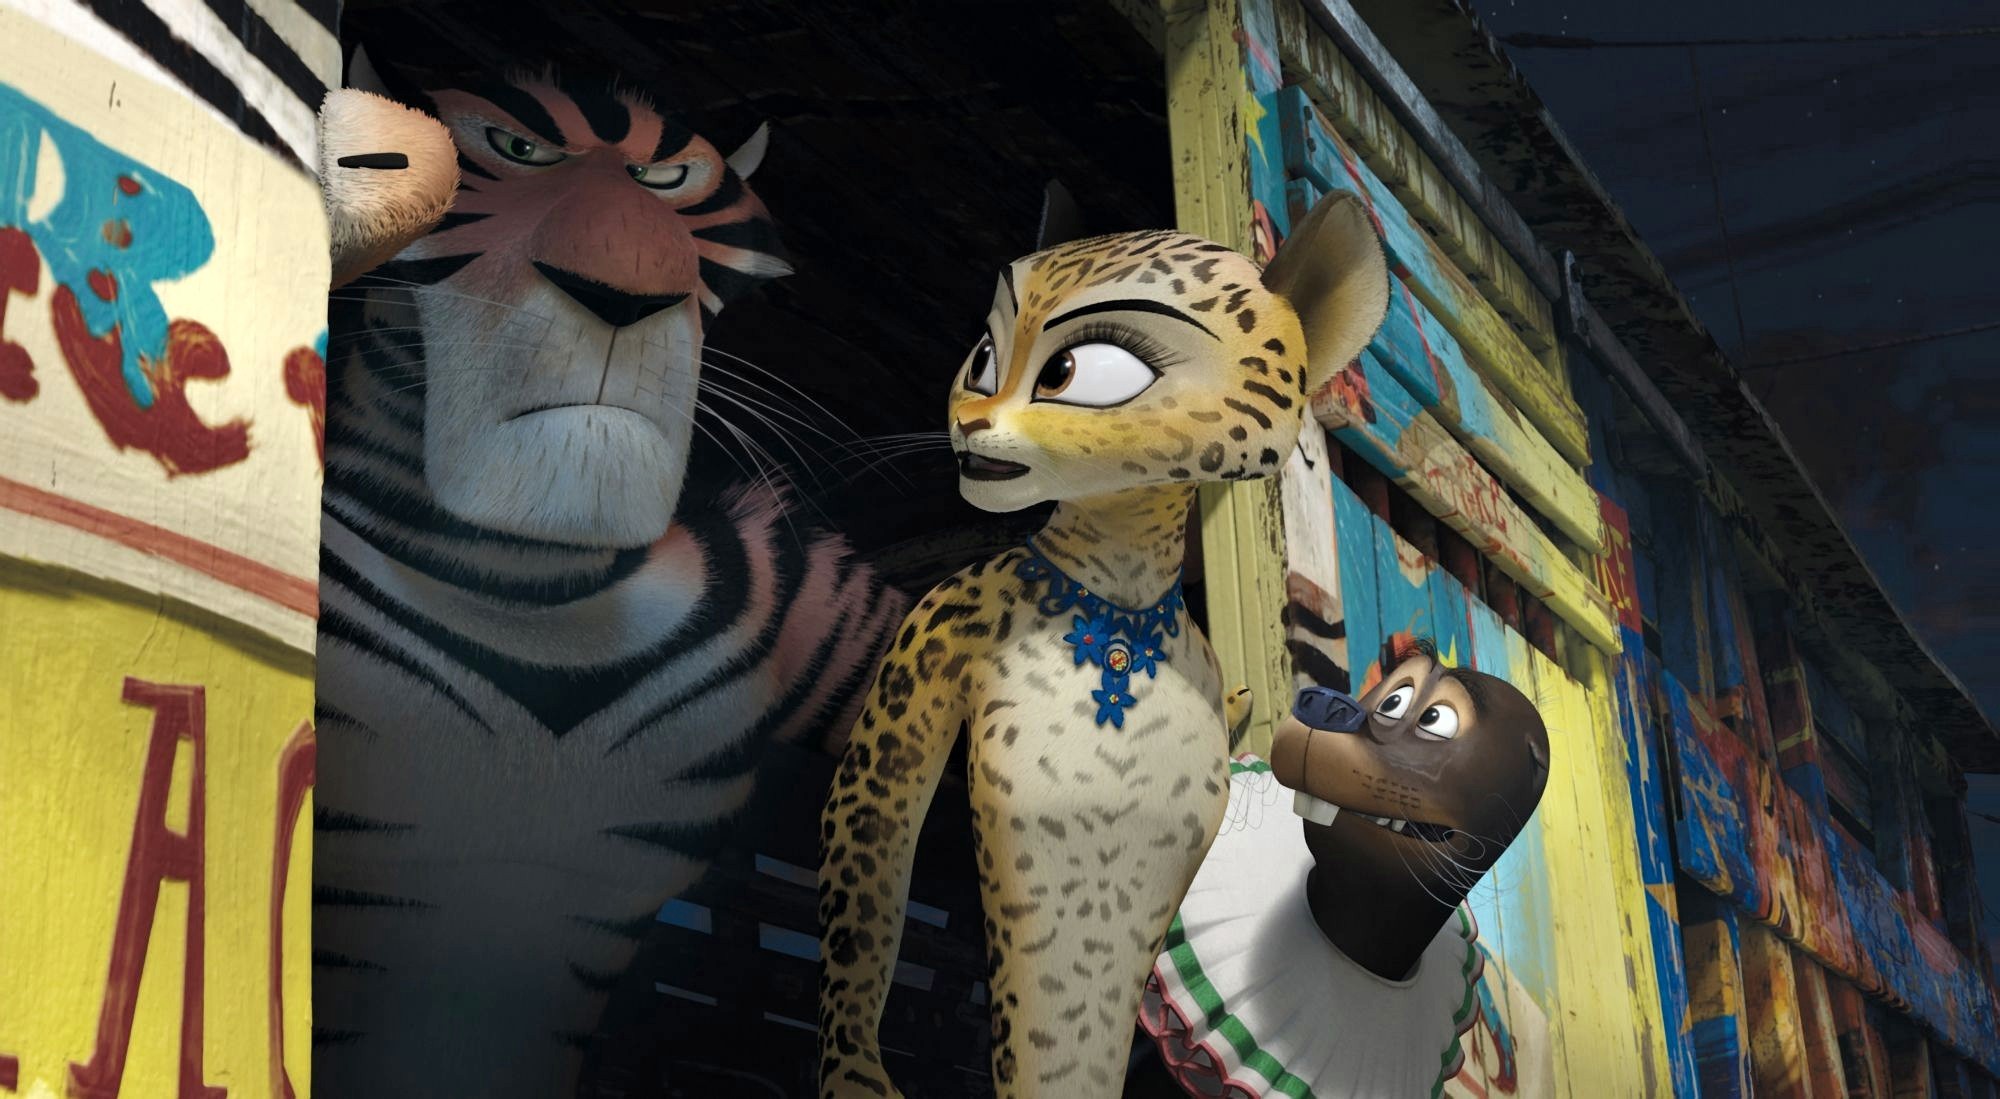 Vitaly the Tiger, Gia the Jaguar and Stefano the Sea Lion of DreamWorks Animation's Madagascar 3: Europe's Most Wanted (2012)